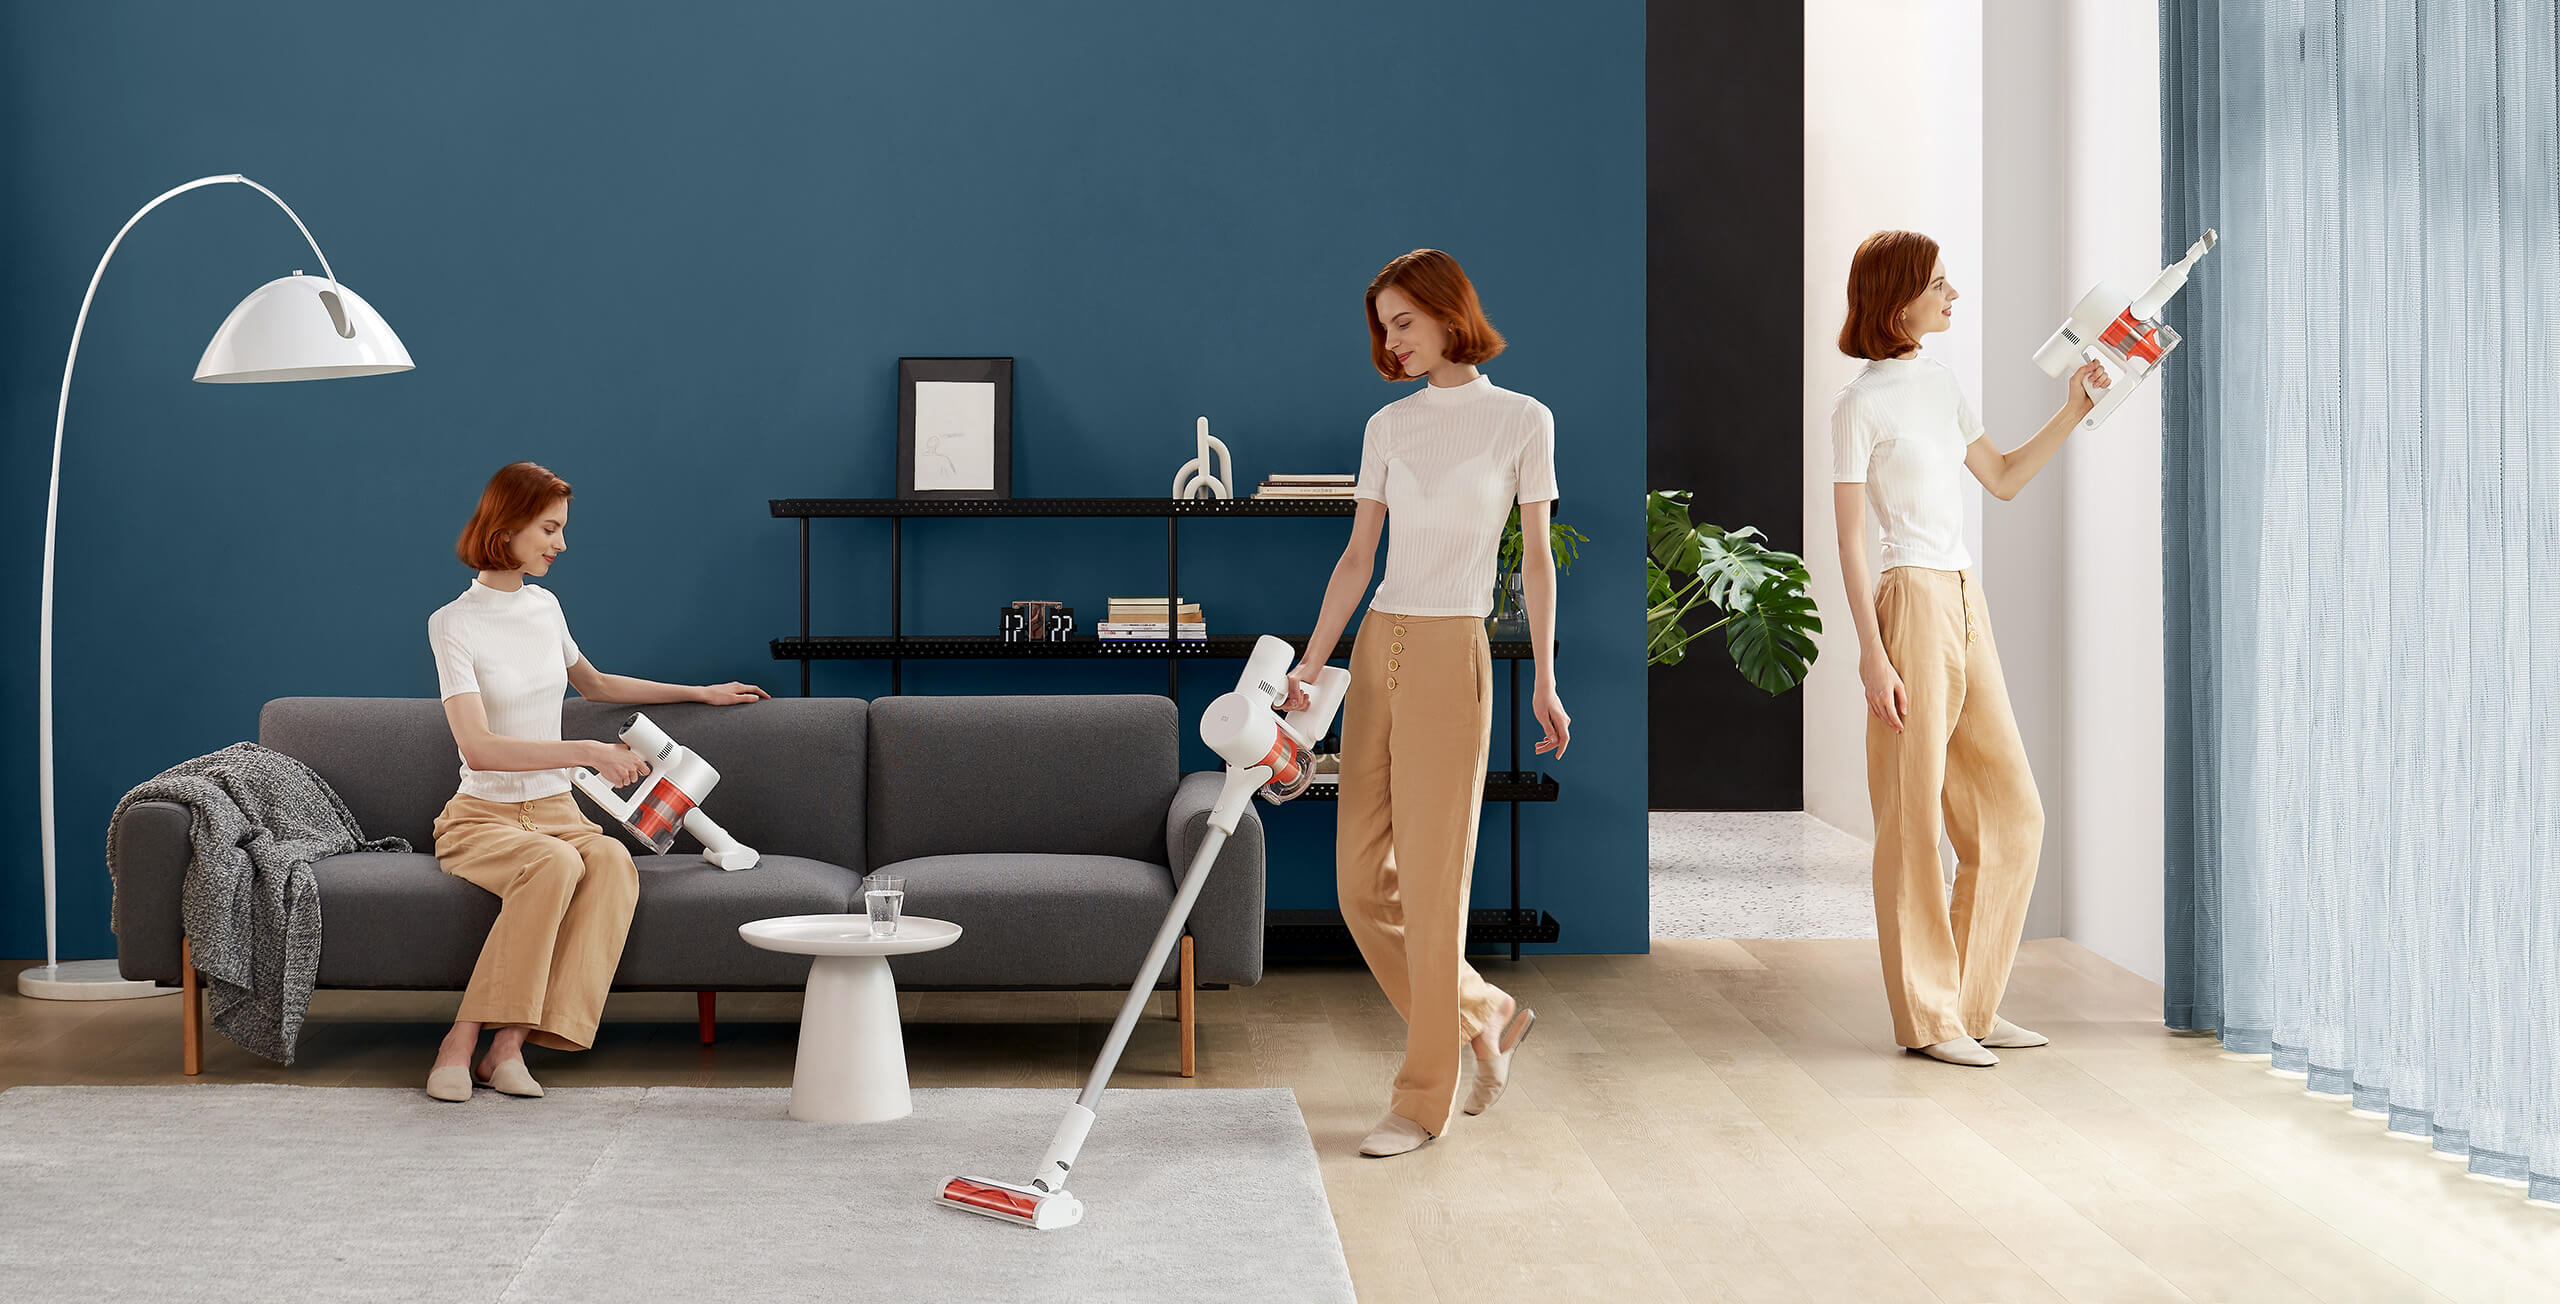 https://i01.appmifile.com/webfile/globalimg/products/pc/mi-vacuum-cleaner-mini-g10/section16.jpg